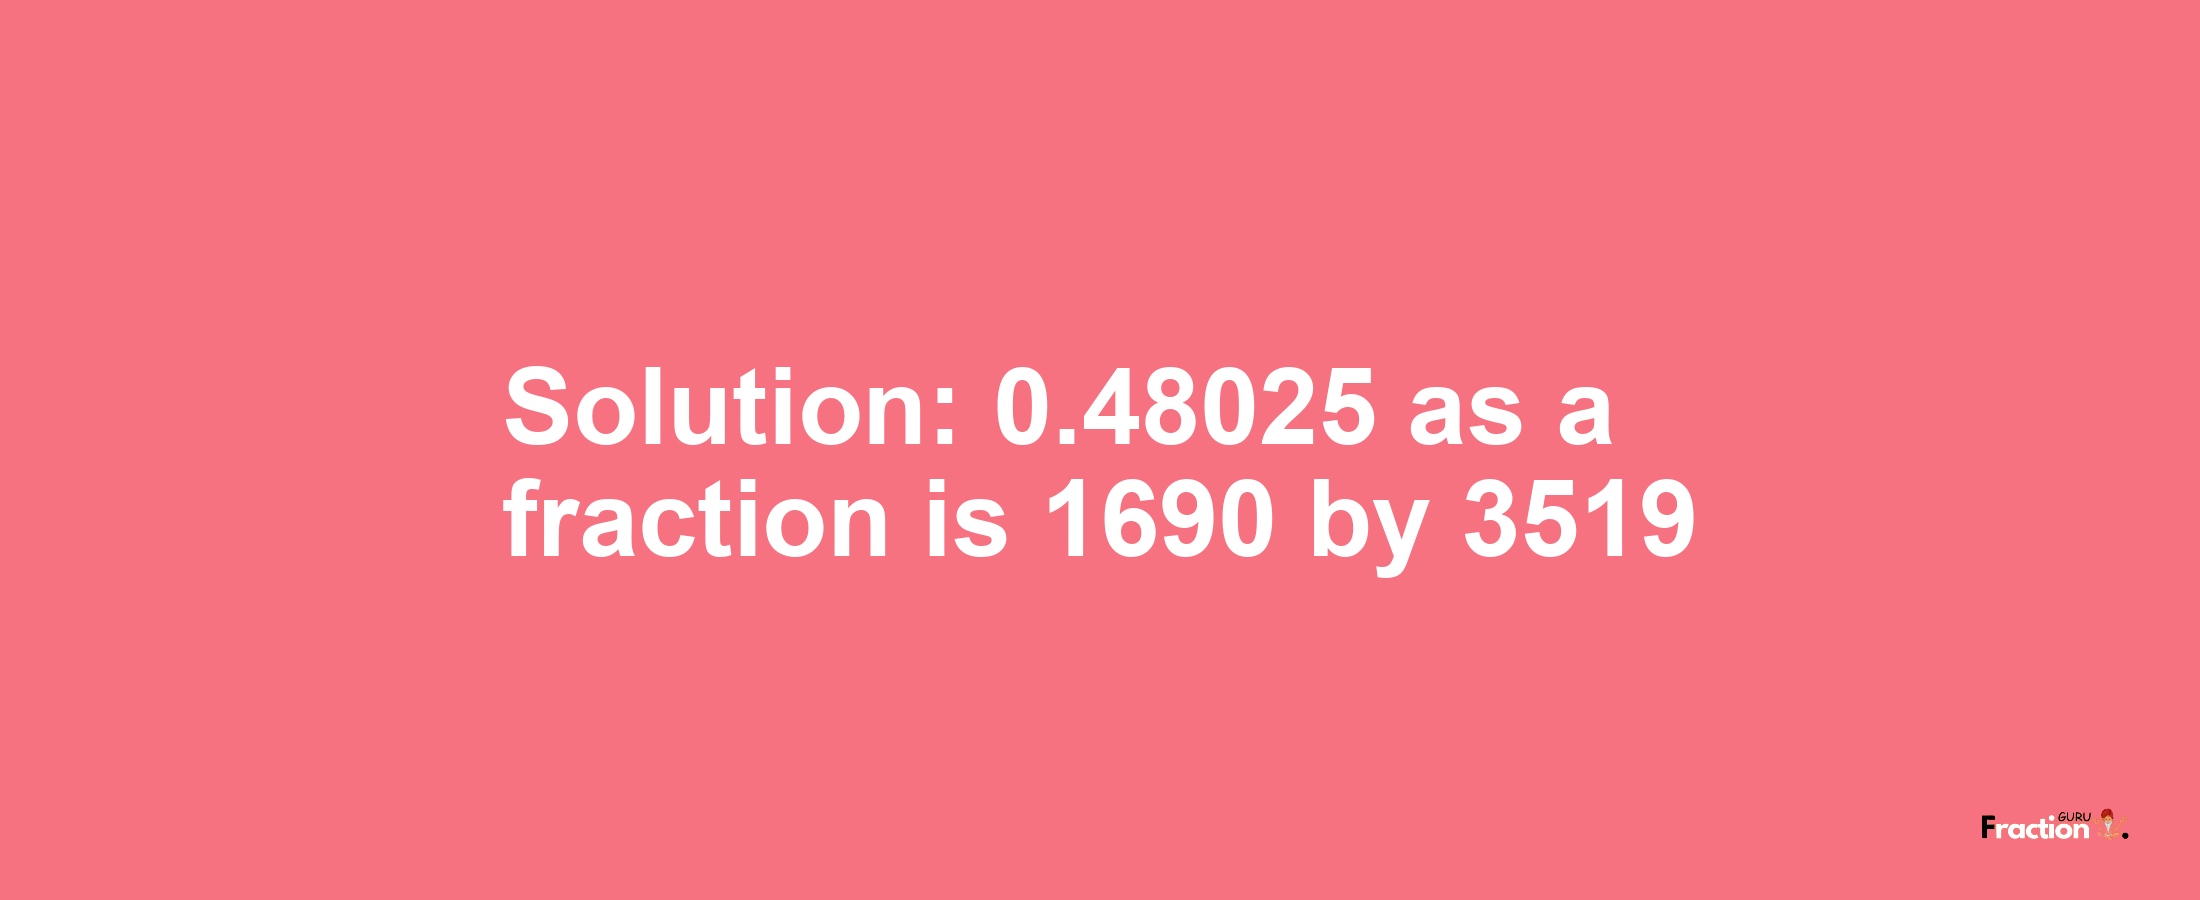 Solution:0.48025 as a fraction is 1690/3519